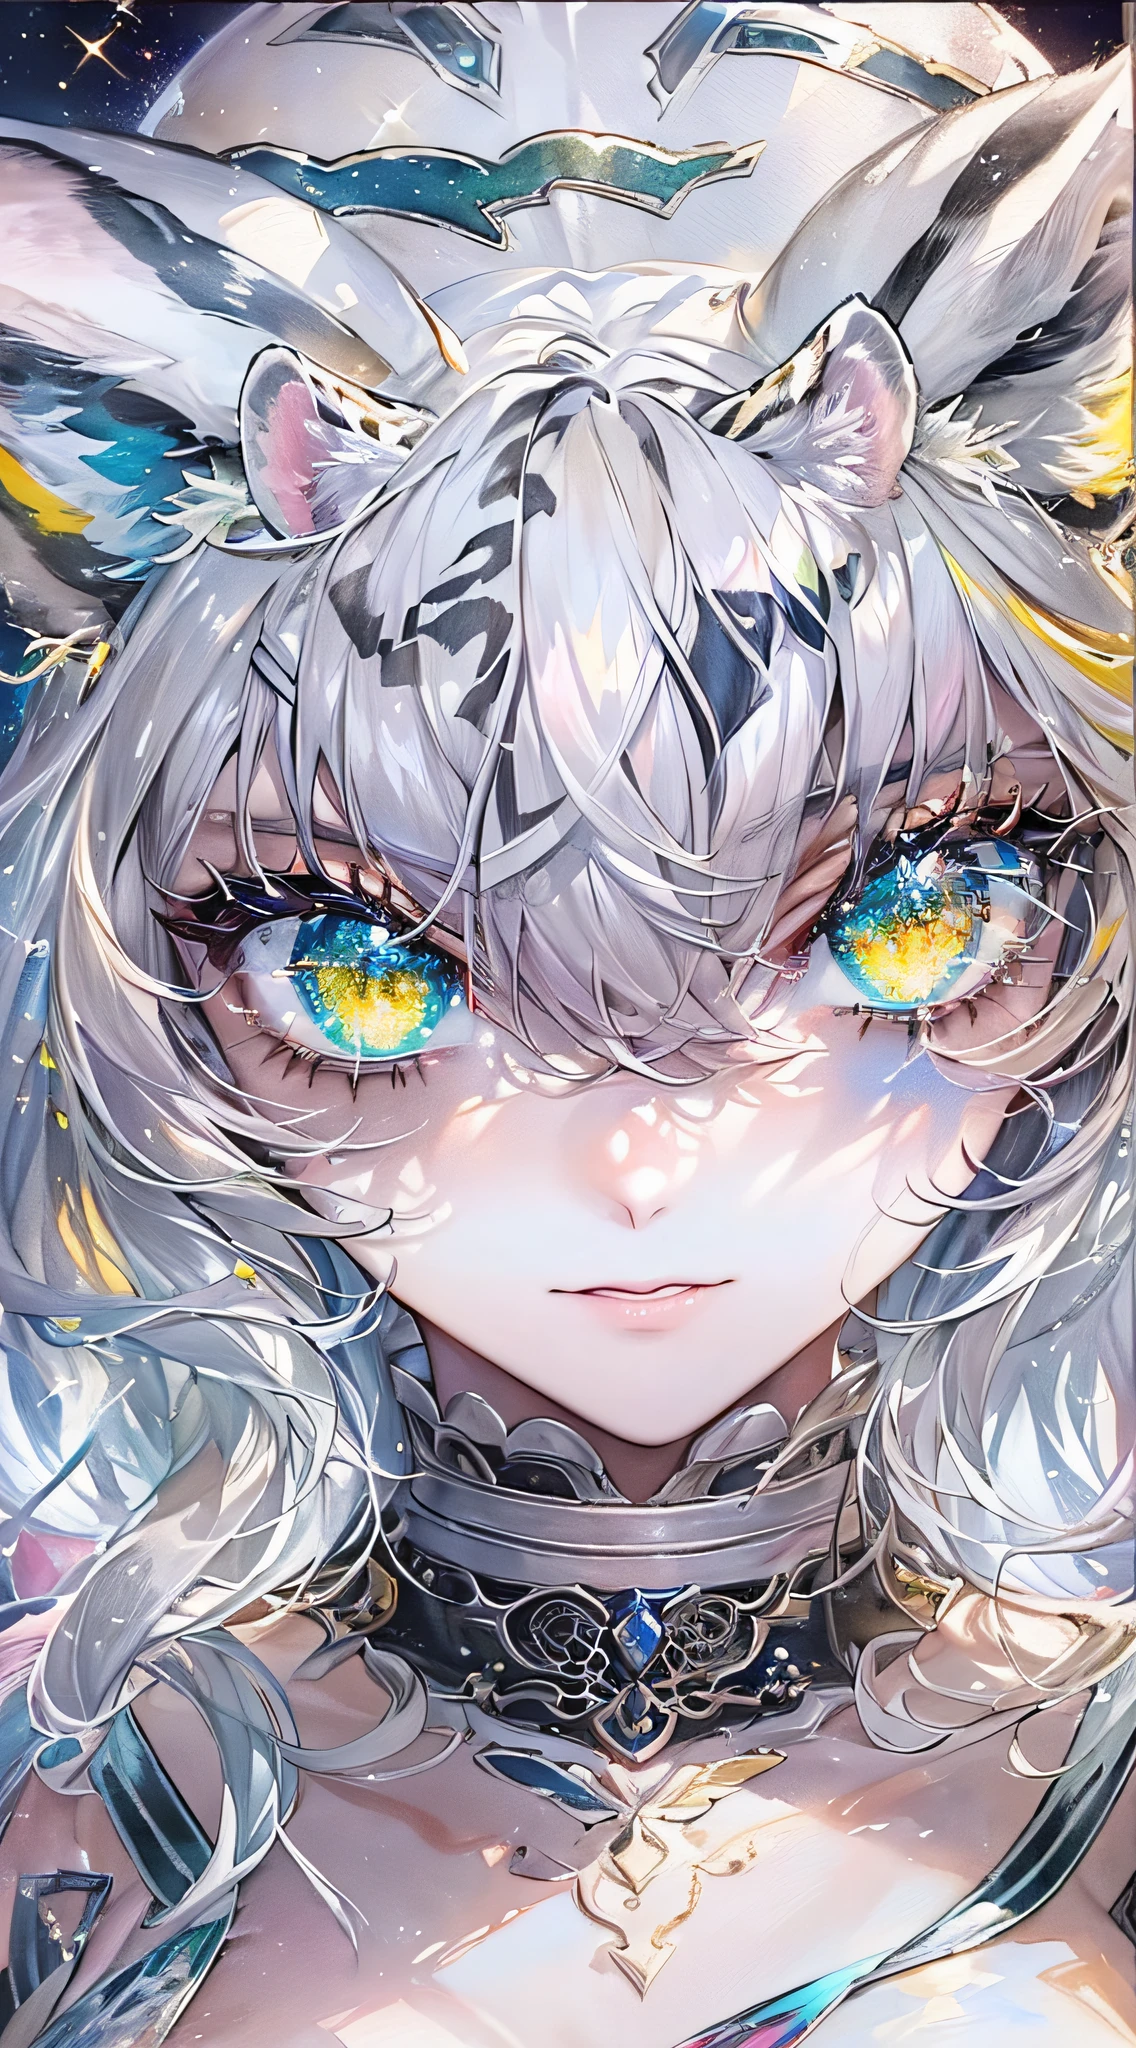 Soft Focus , (Bright gradient watercolor :1.5, Lens Flare:1.5 , Glitter :1.5), Glow , Dreamy , White background、Grid illusion, Colorful,、((extremely detailed eye:1.5)),((Face Zoom:1.5)),((Face Focus:1.5)),(((​masterpiece、top-quality、top-quality、watercolor paiting)))(Curly)、Official art、Beautifully Aesthetic:1.2)、eye glass:1.5、(girl with:1.5)、(Fractal Art:1.3)、The upper part of the body、colourfull、((Ultra-detailed retina:1.5))、embarrassed from、(Midriff)、((Super Detail Eyes:1.5))、(rainbow-colored hair、colourful hair、Half white and half black hair:1.5)、((White tiger ears:1.5,White tiger tail:1.5)),((the Extremely Detailed CG Unity 8K Wallpapers、​masterpiece、top-quality))、((ultra-detailliert:1.2))、(The best lighting、Best Shadows、extremely delicate and beautiful)、(the Extremely Detailed CG Unity 8K Wallpapers、​masterpiece、best qualtiy、ultra-detailliert)、(The best lighting、Best Shadows、extremely delicate and beautiful)、(the perfect body:1.5),{{{{Dazzling brilliance}}}}、Rainbow Bridge、(masutepiece:1.2), Best Quality, (Illustration:1.2), (Ultra-detailed), hyperdetails, (delicate detailed), (Intricate details), (Cinematic Light, best quality backlight), solo women, Perfect body, (4girl), (Best Illumination, extremely delicate and beautiful), Cinematic Light、【emblem:Irridescent color 】、Blue sky with white angel wings proportional to body、Sunnyday